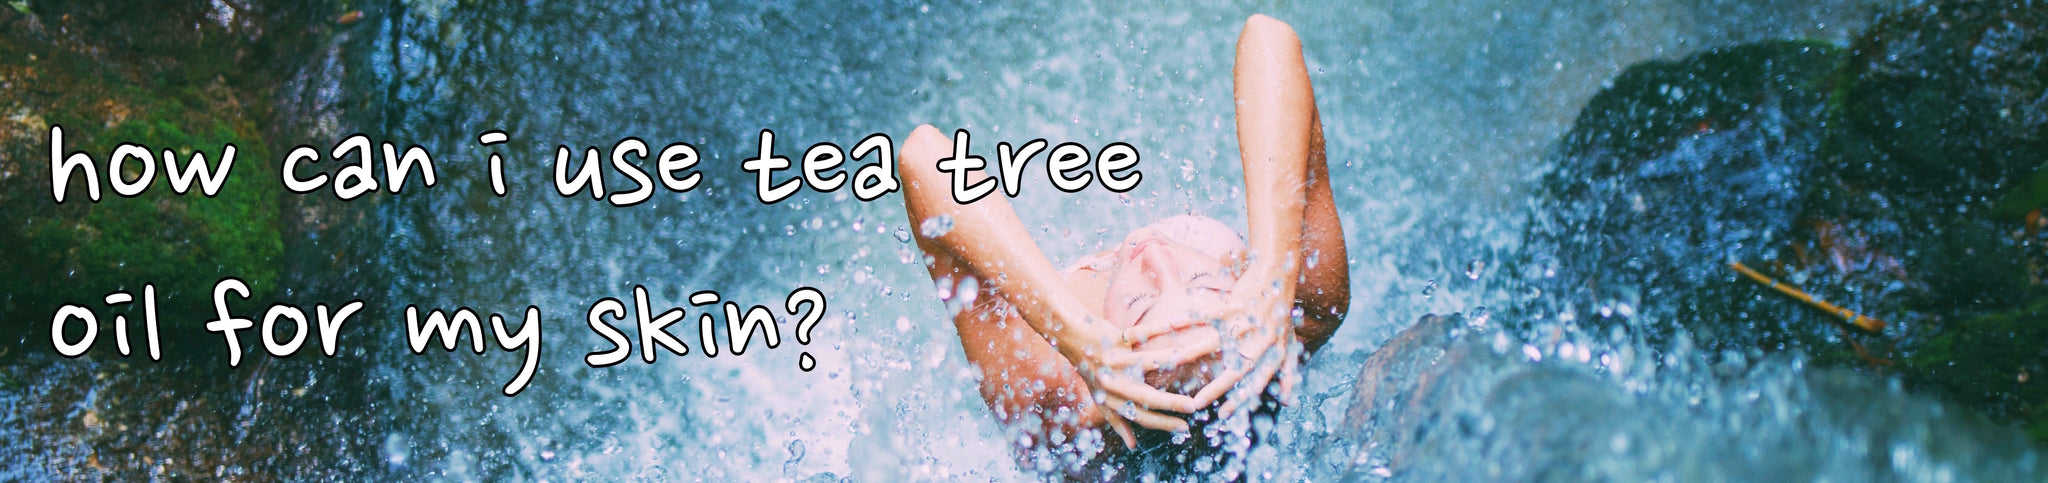 how can i use tea tree oil for my skin?